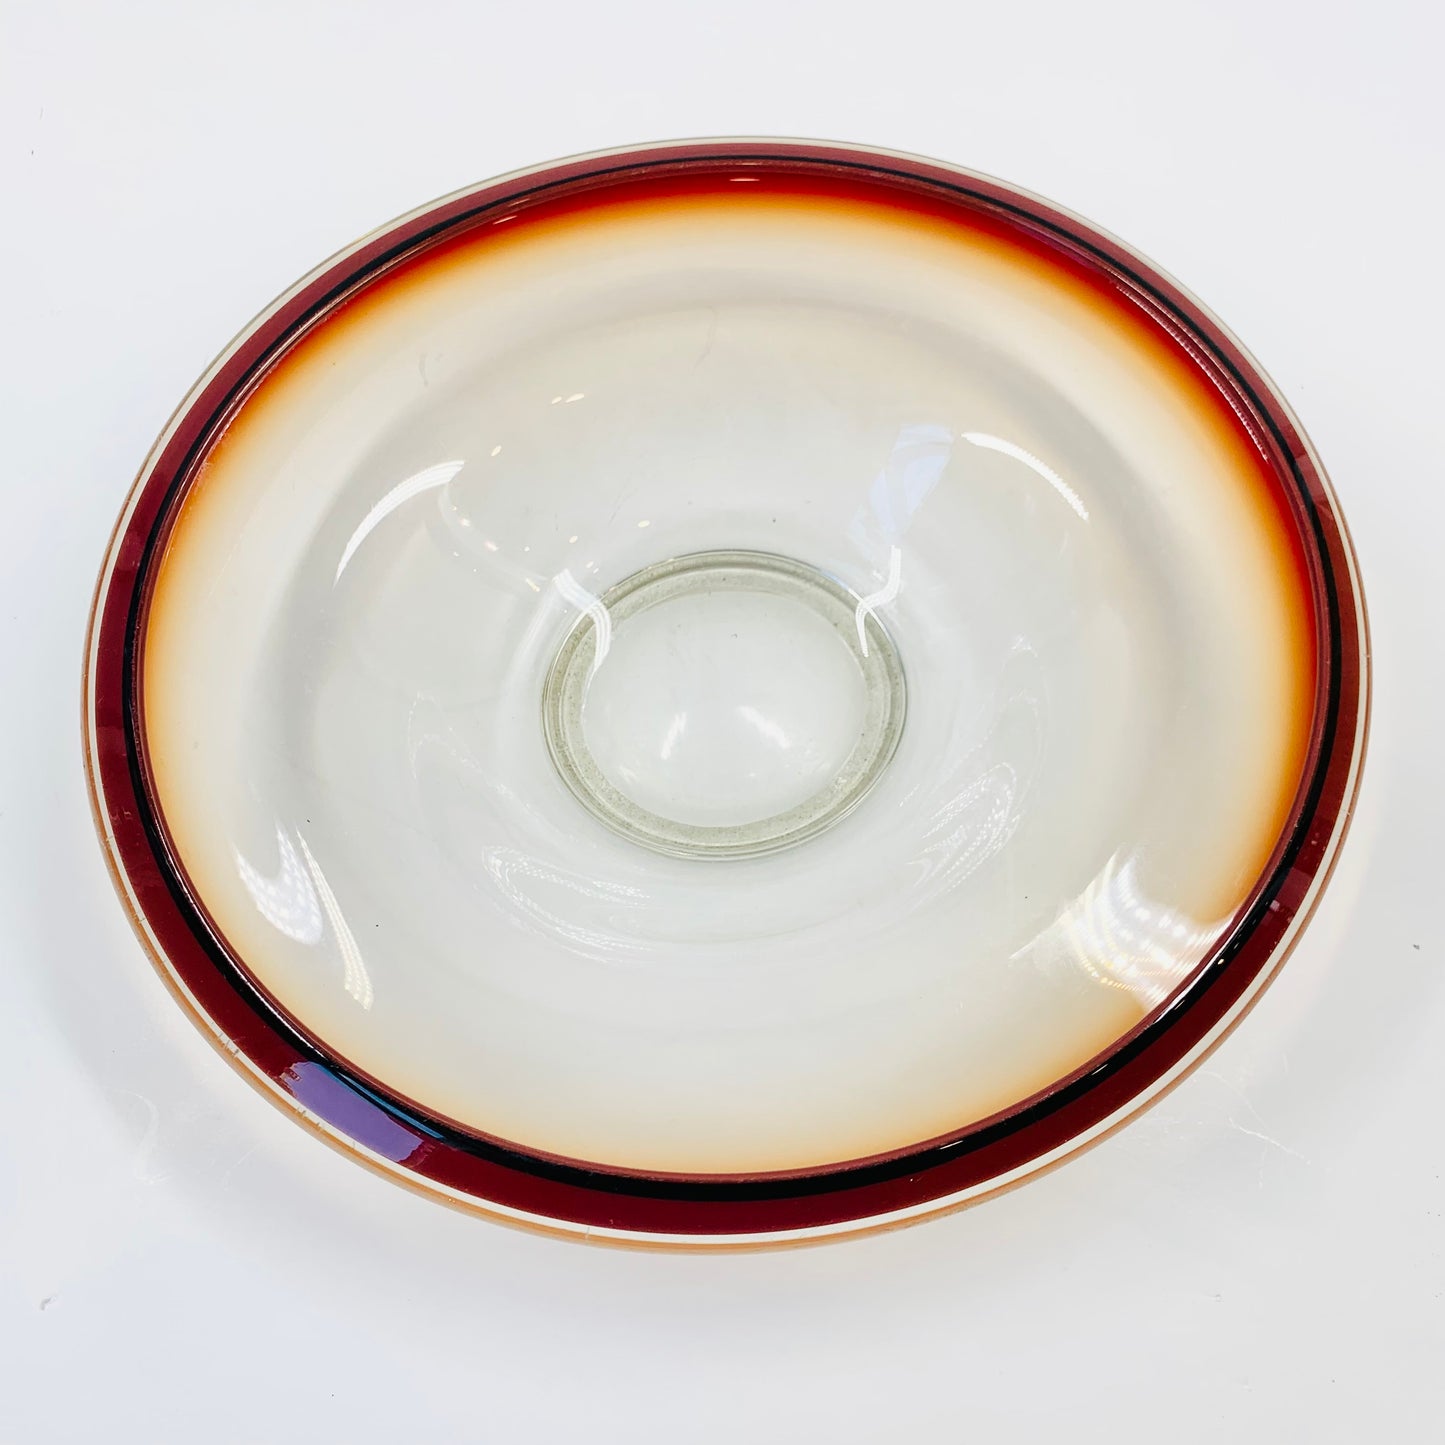 Stunning hand made Midcentury Dutch glass bowl with red ombré rim